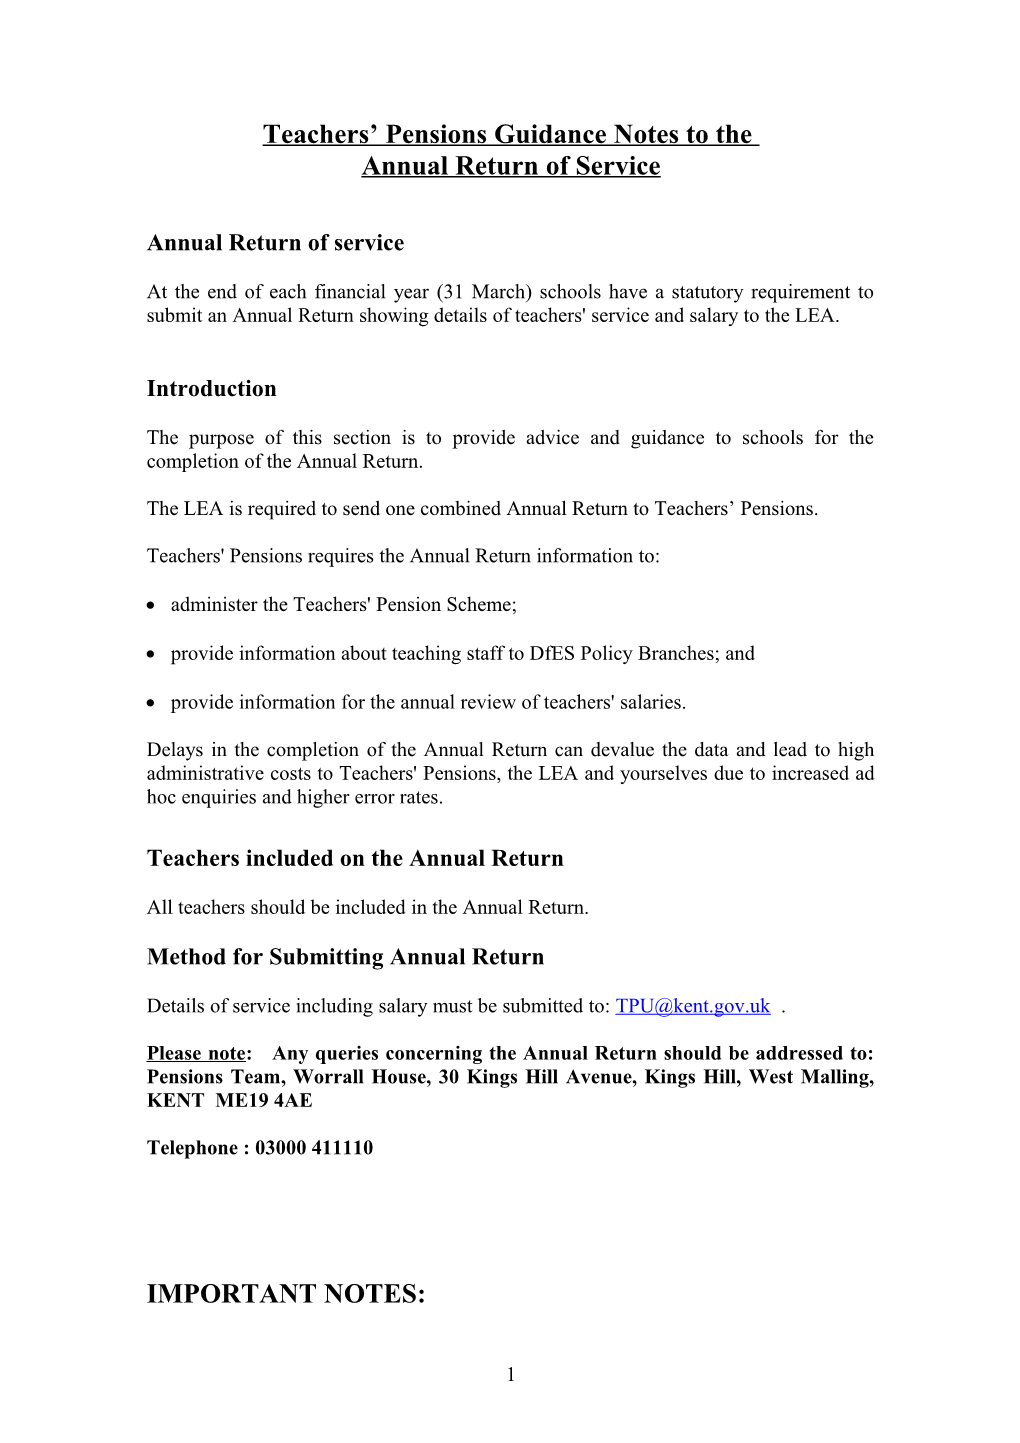 Teachers Pensions Guidance Notes to The